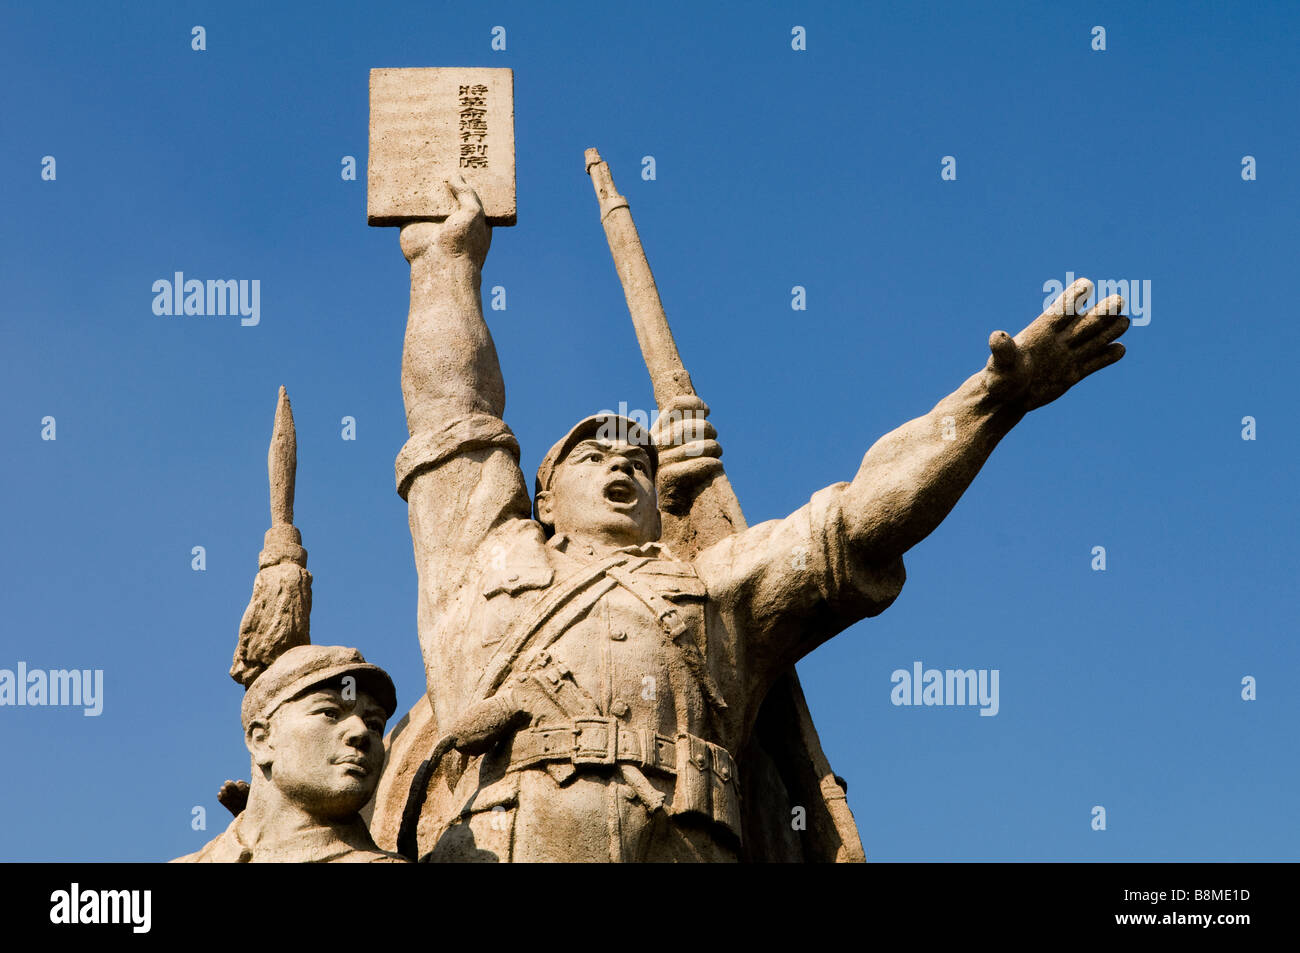 The statue of this communist workers stands on the first bridge over the Yangtze river in Nanjing, Jiangsu, China. Stock Photo